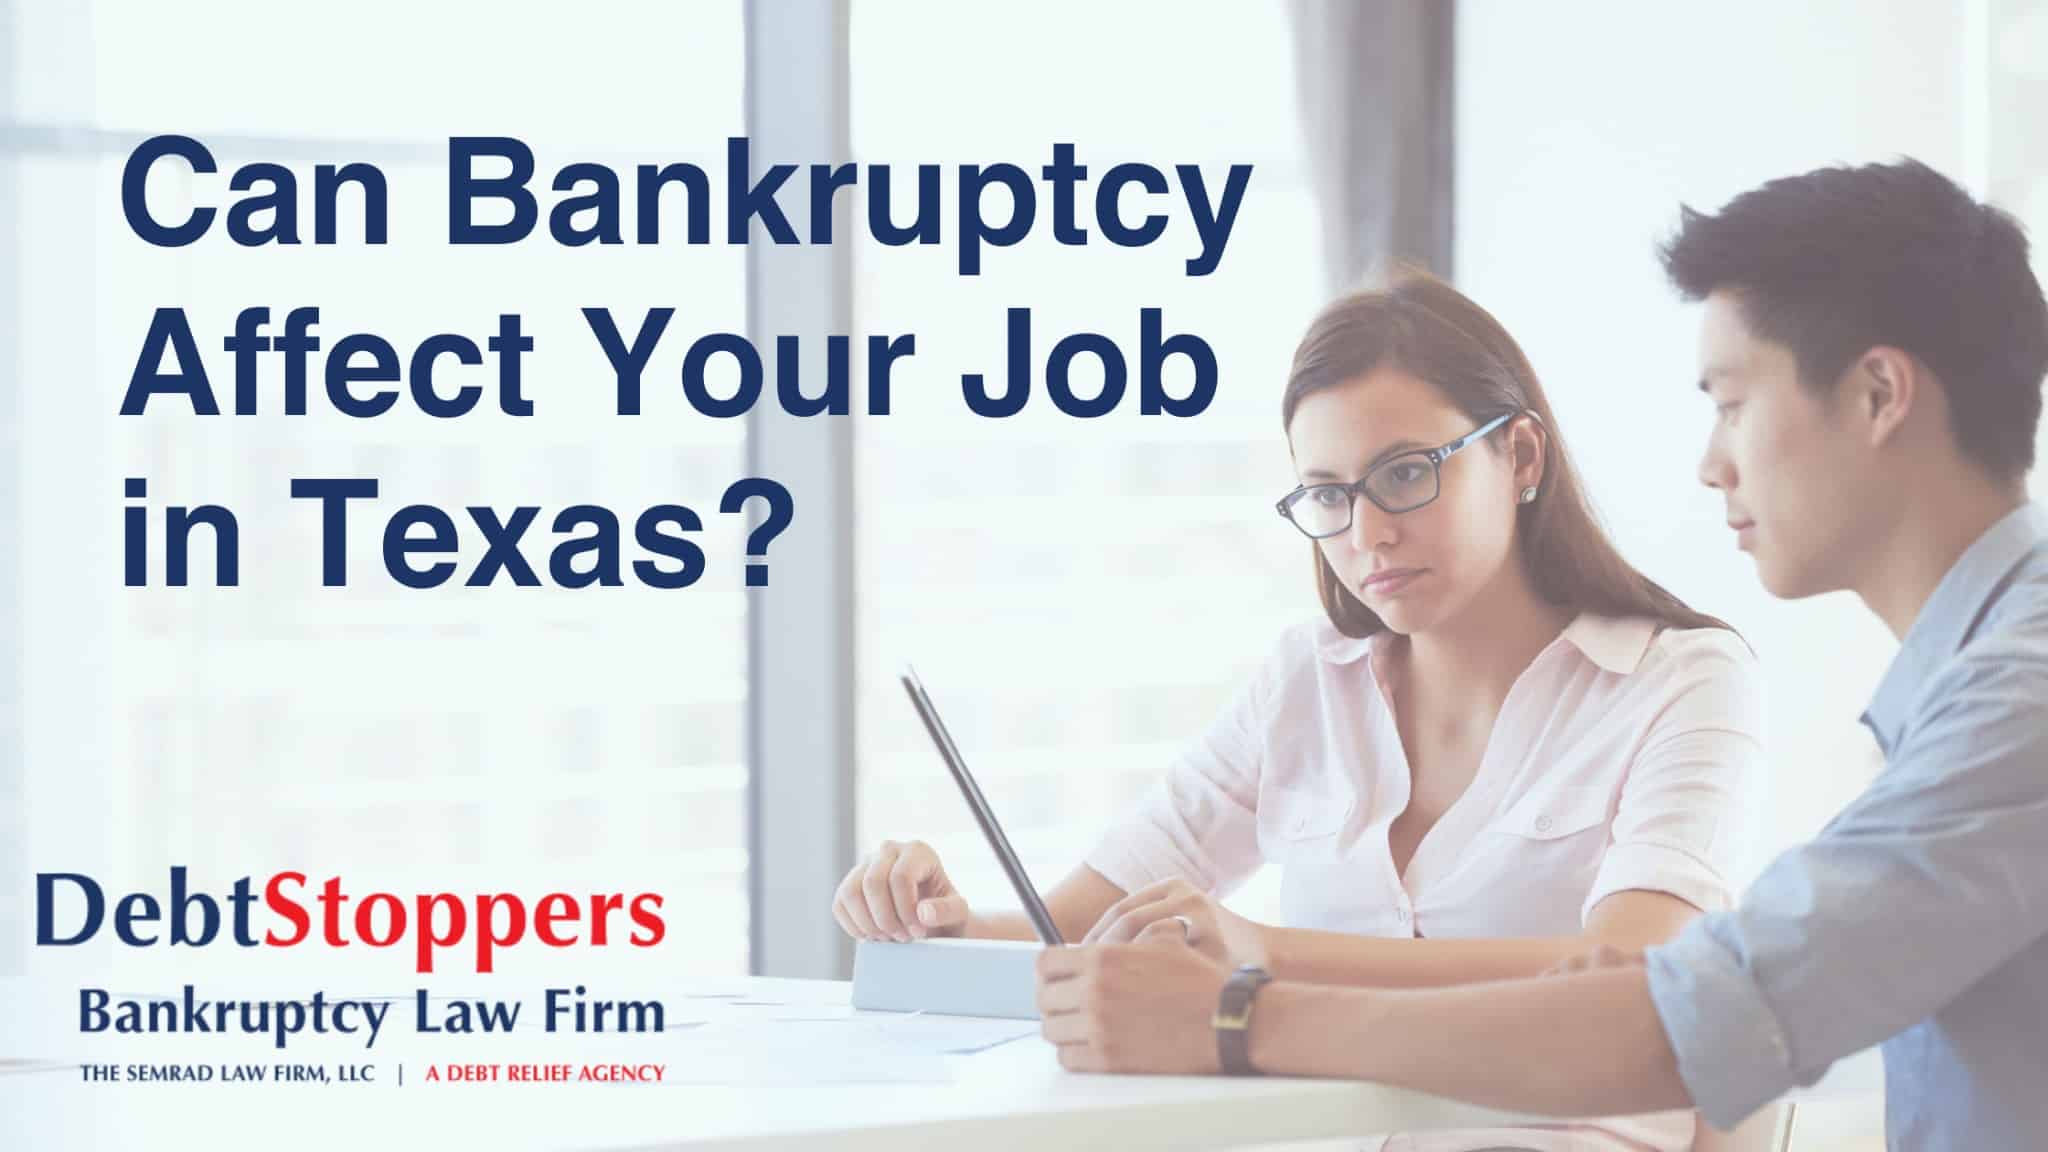 Can Bankruptcy Affect Your Job in Texas?